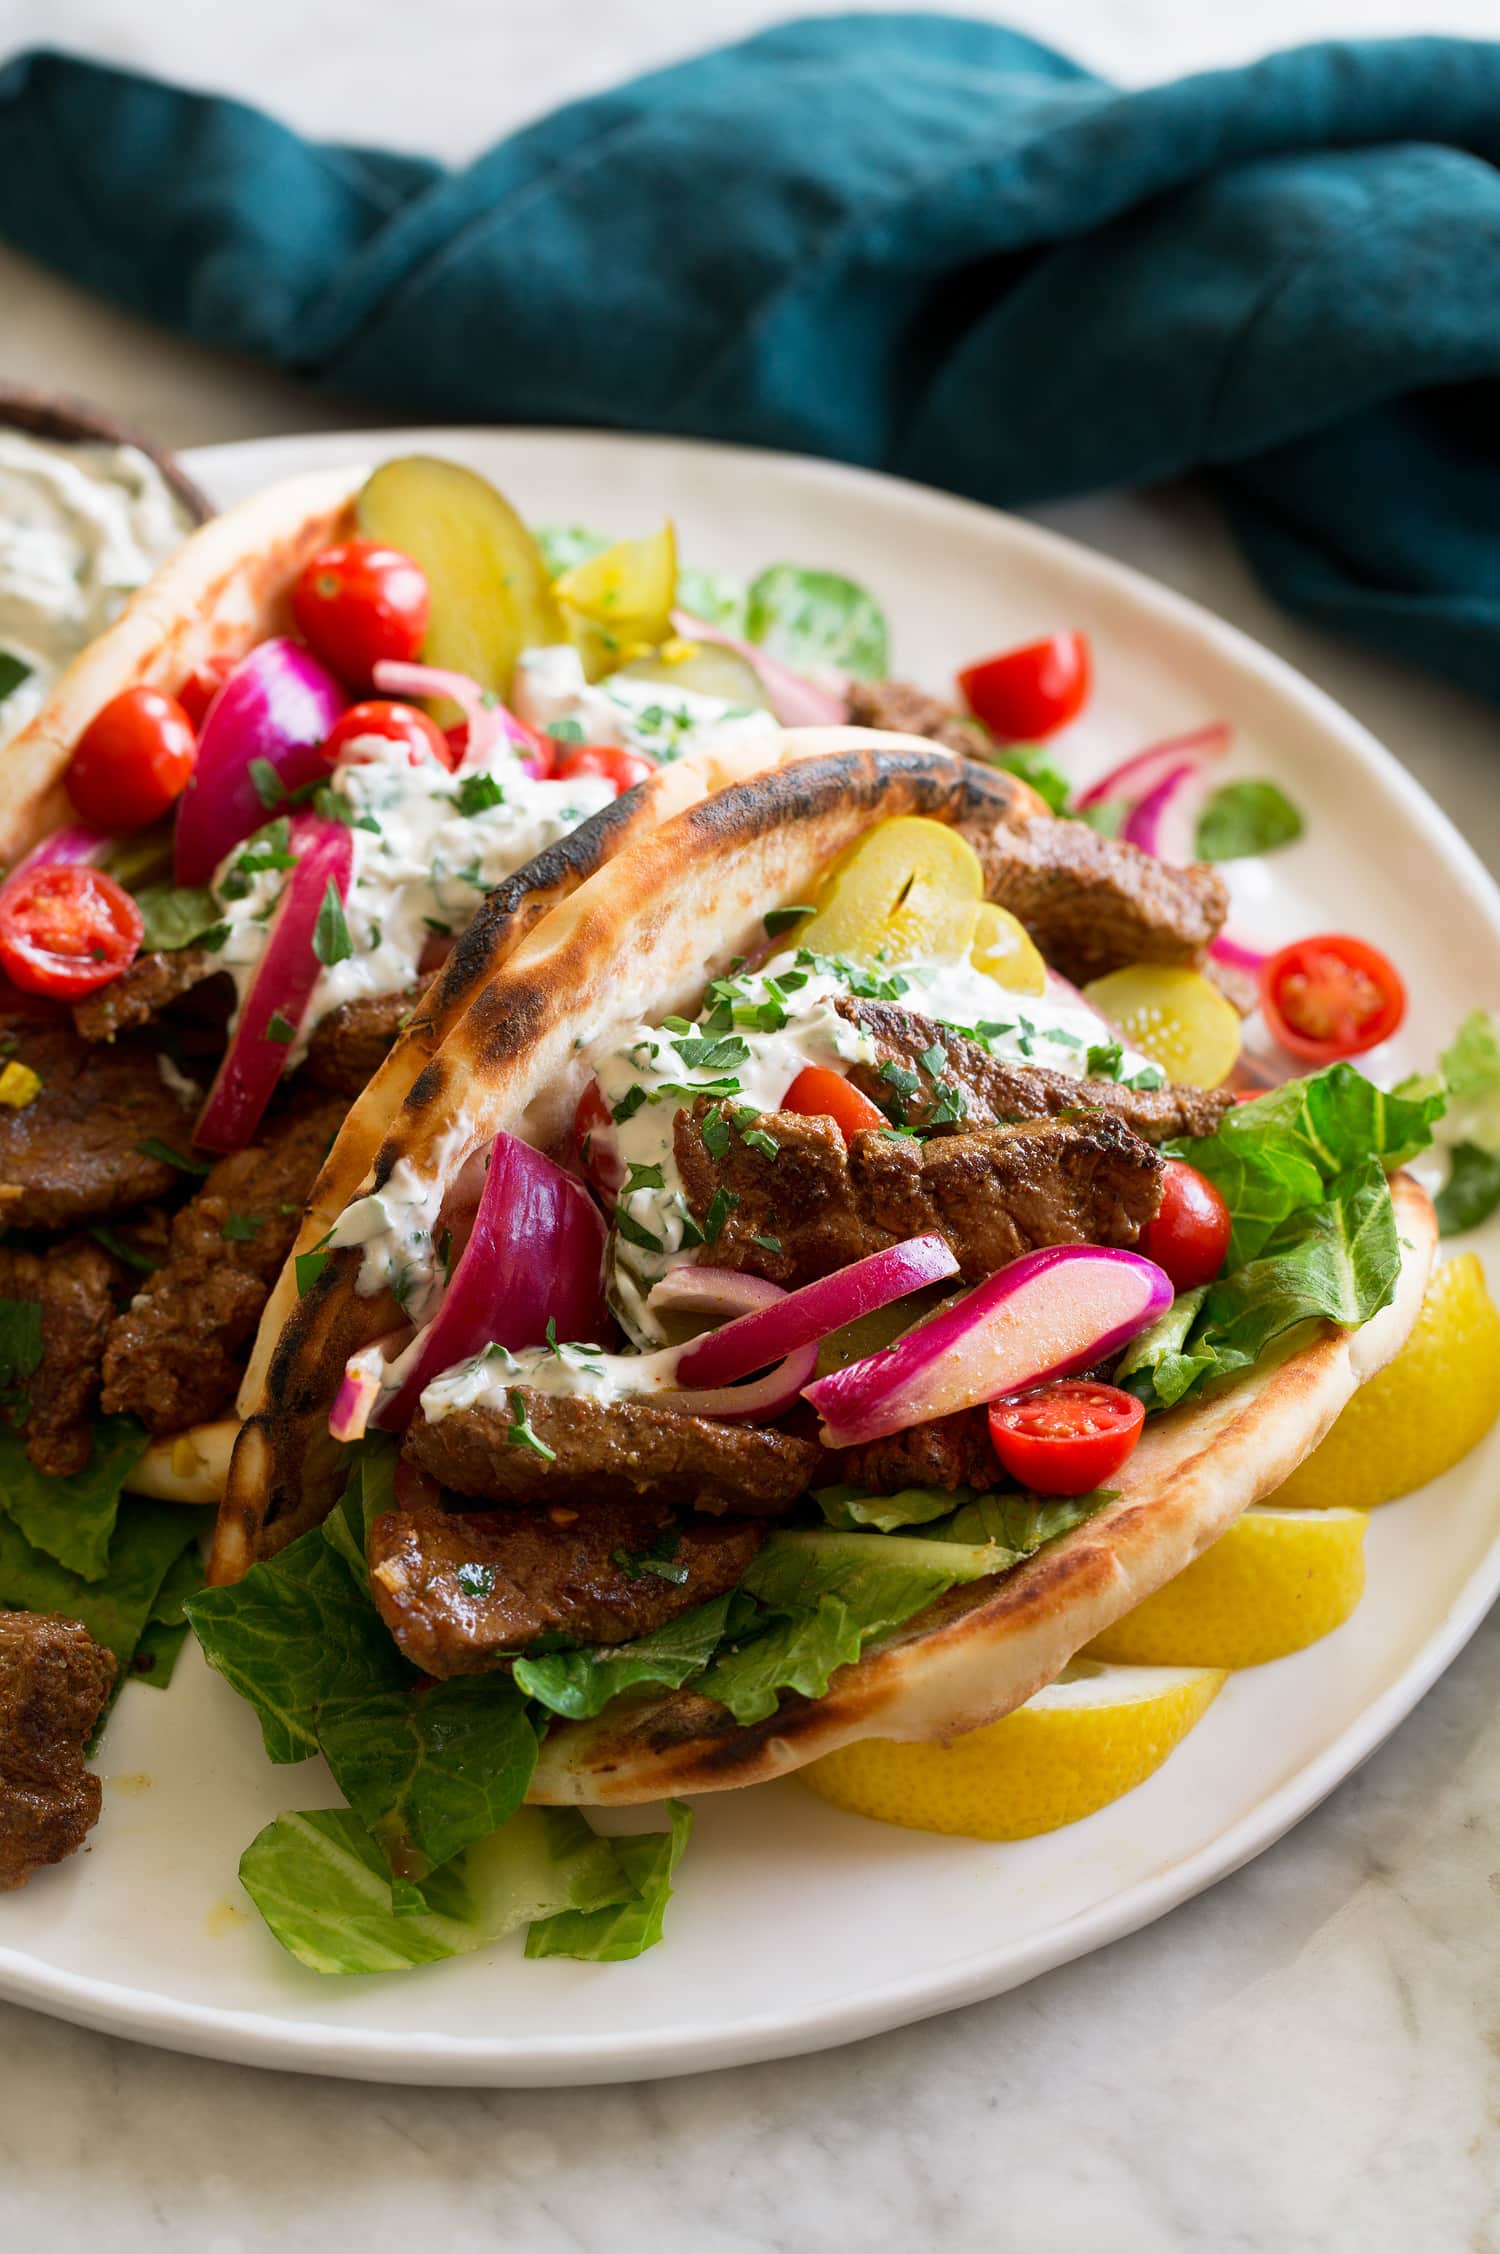 Beef shawarma shown in a pita with lettuce, tomatoes, red onion, pickles and a tahini yogurt sauce.